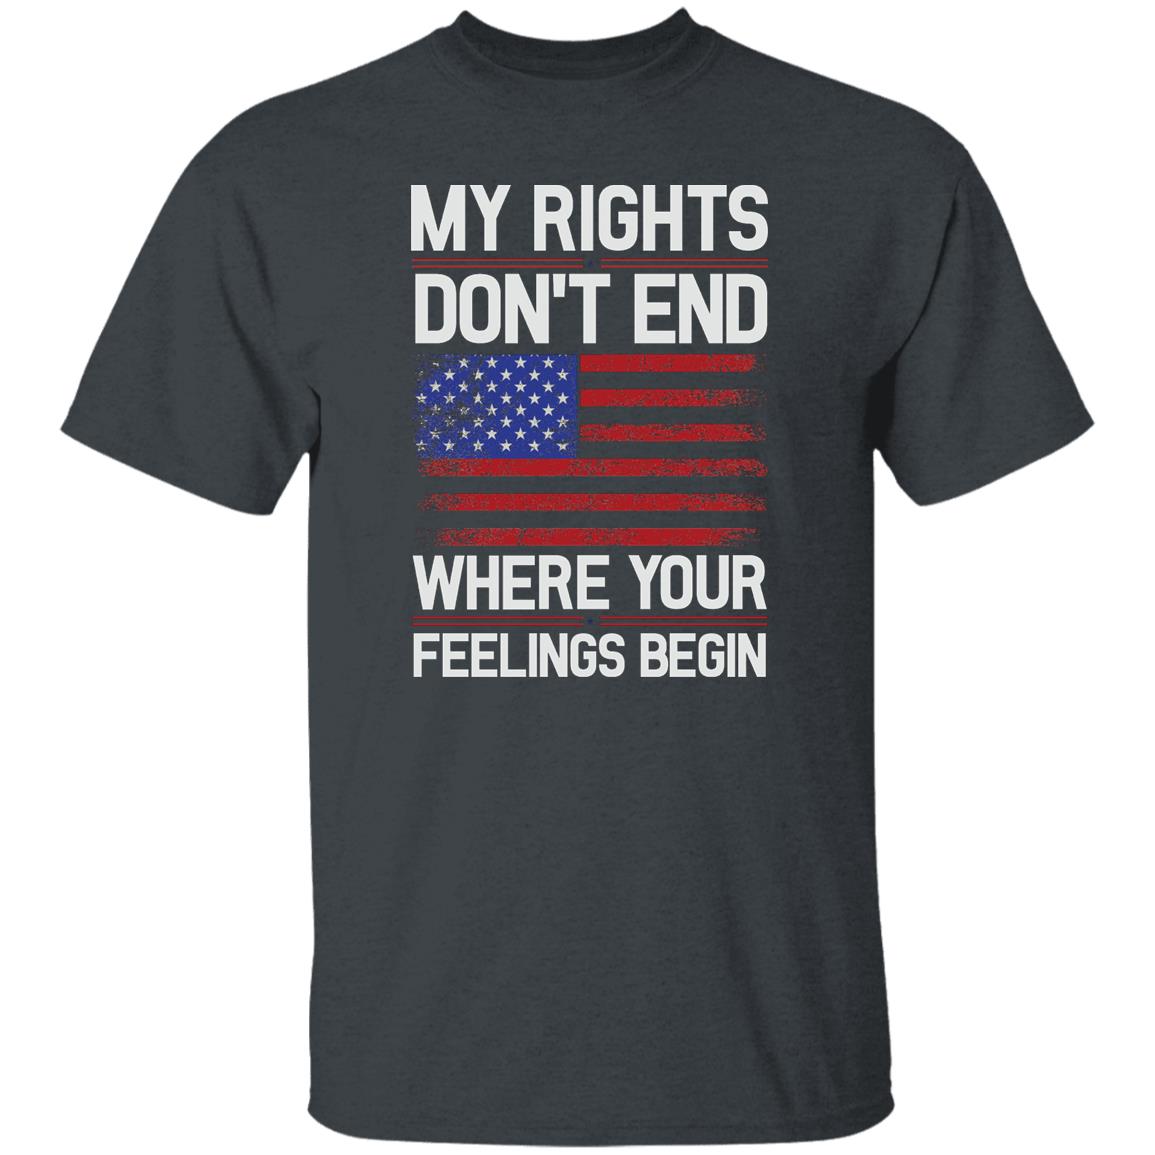 My Rights Don't End...